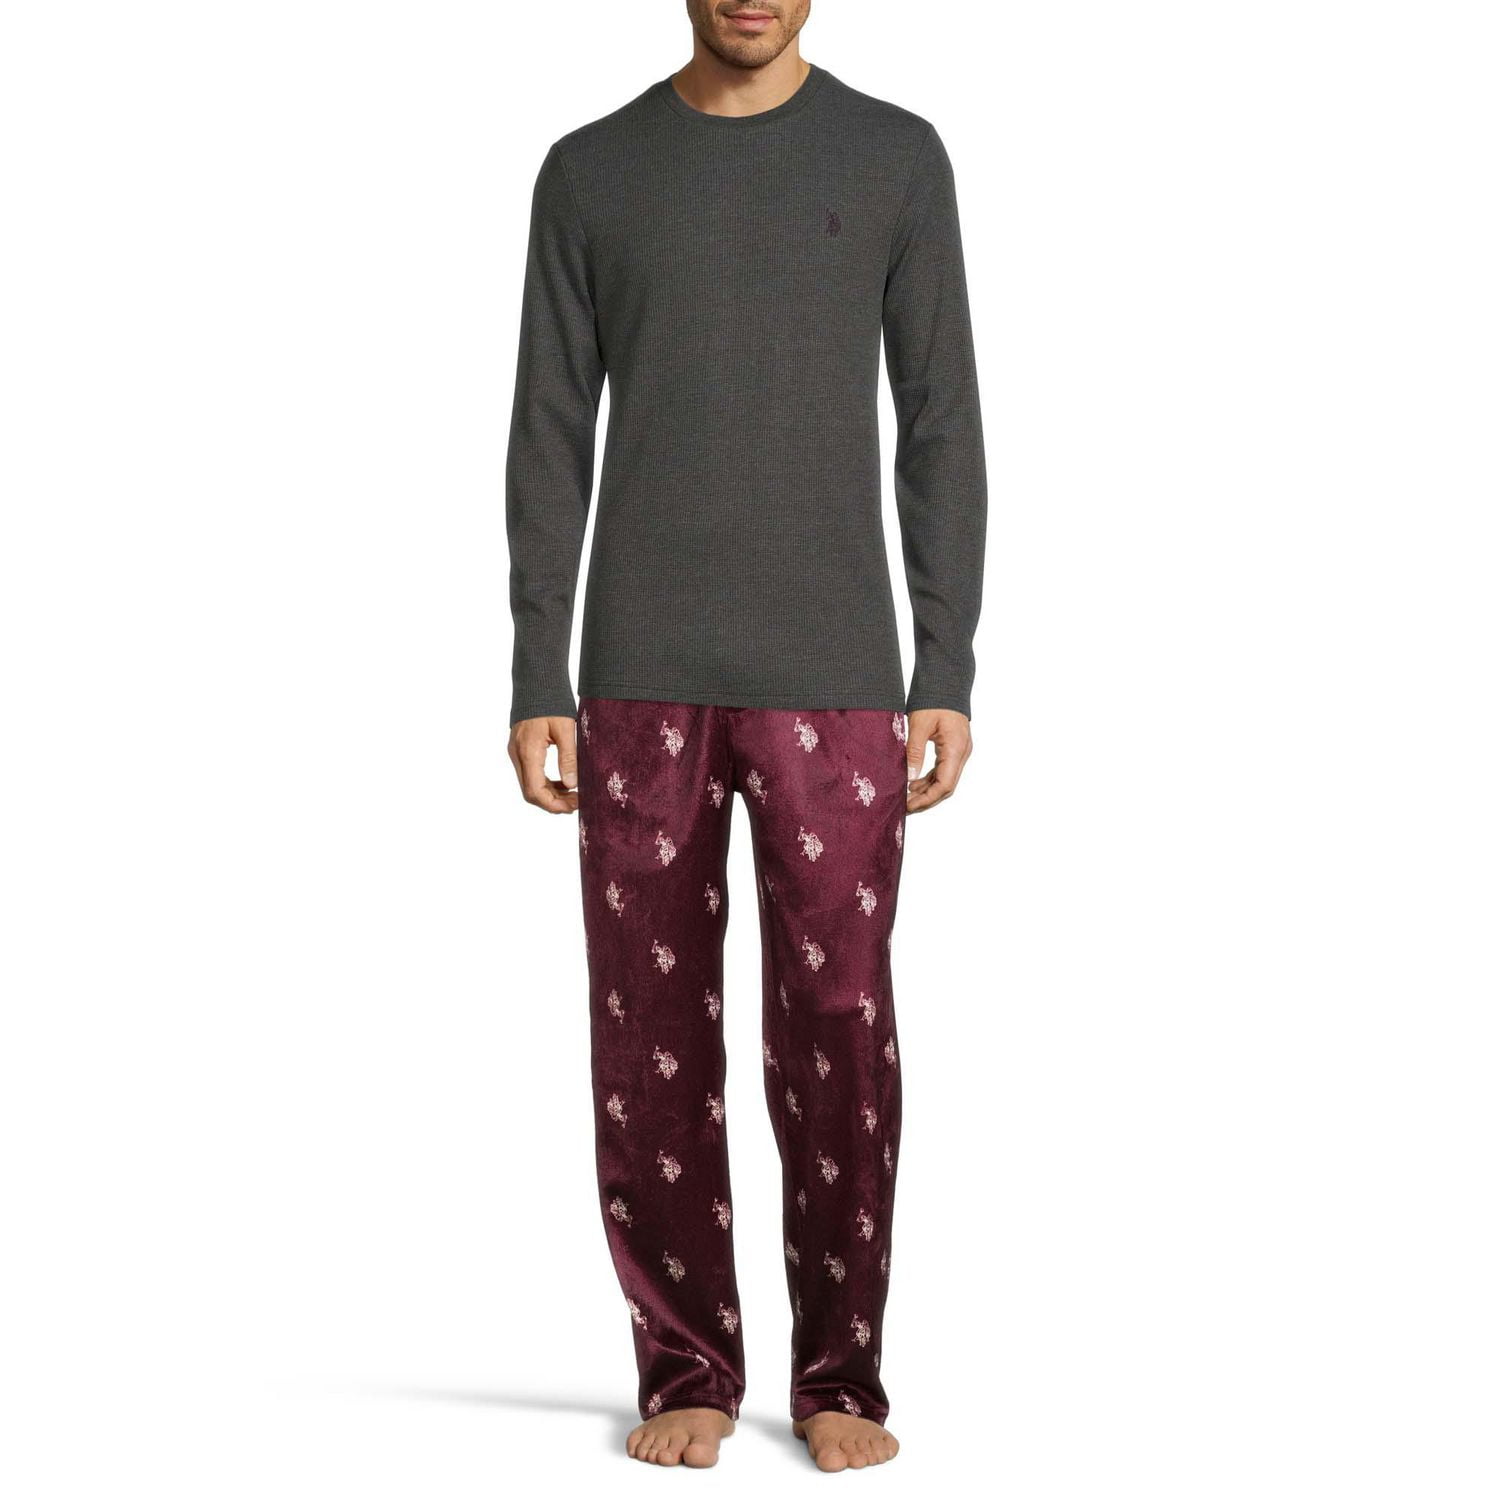 U.S. Polo Assn. Men's Thermal Pajama Set - Waffle Knit Top and Long John  Sweatpants, Gift Box, Size Small, Blue/Scooter Plaid at  Men's  Clothing store